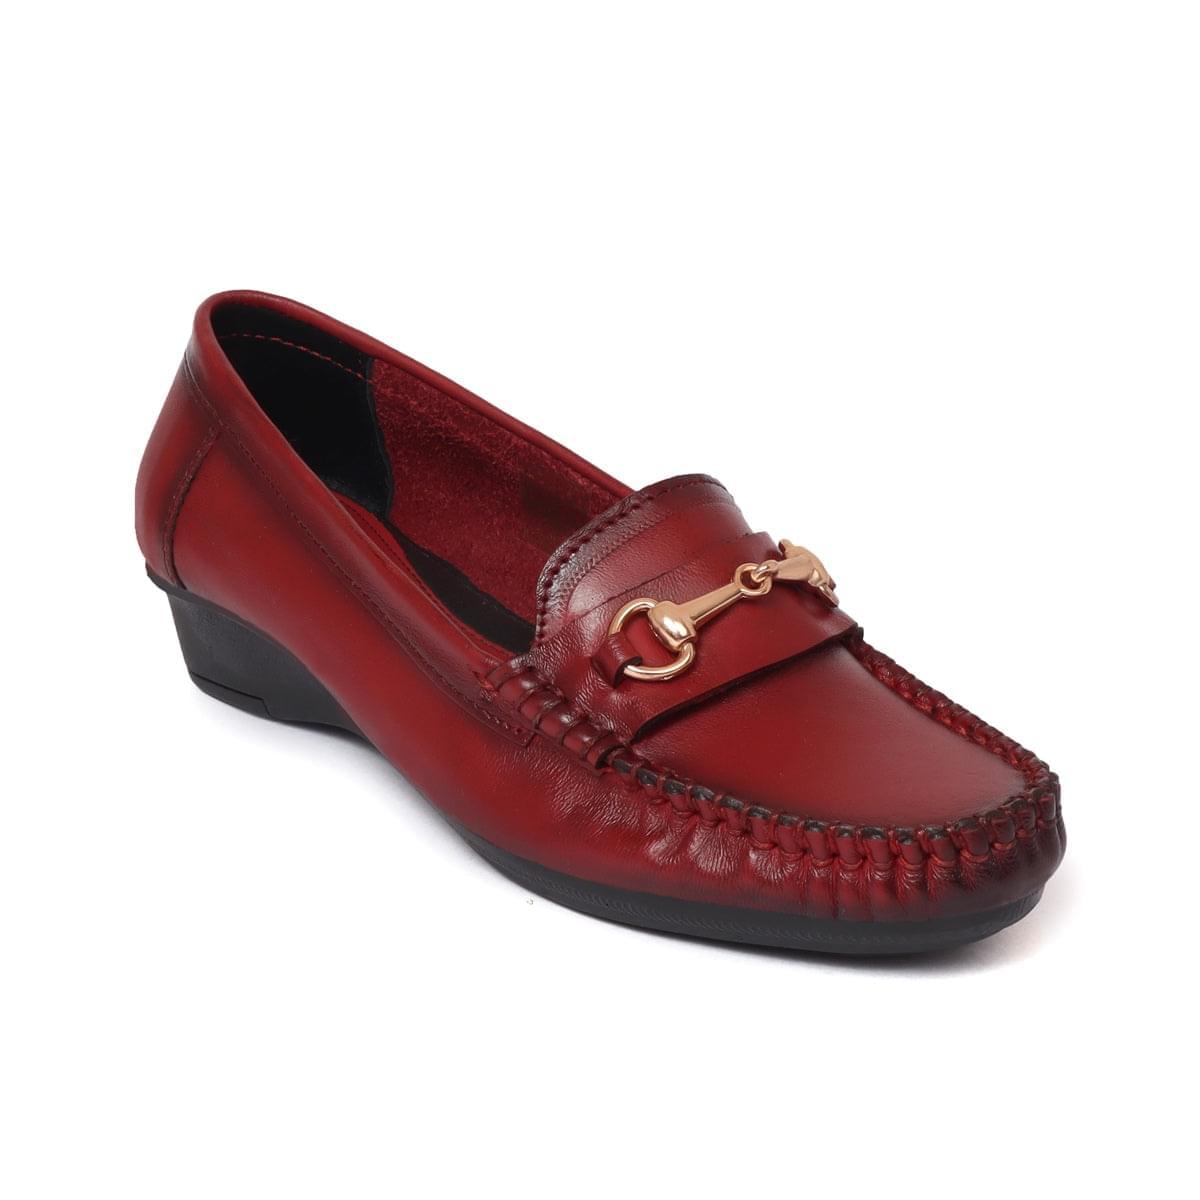 loafer formal shoes for women cherry4